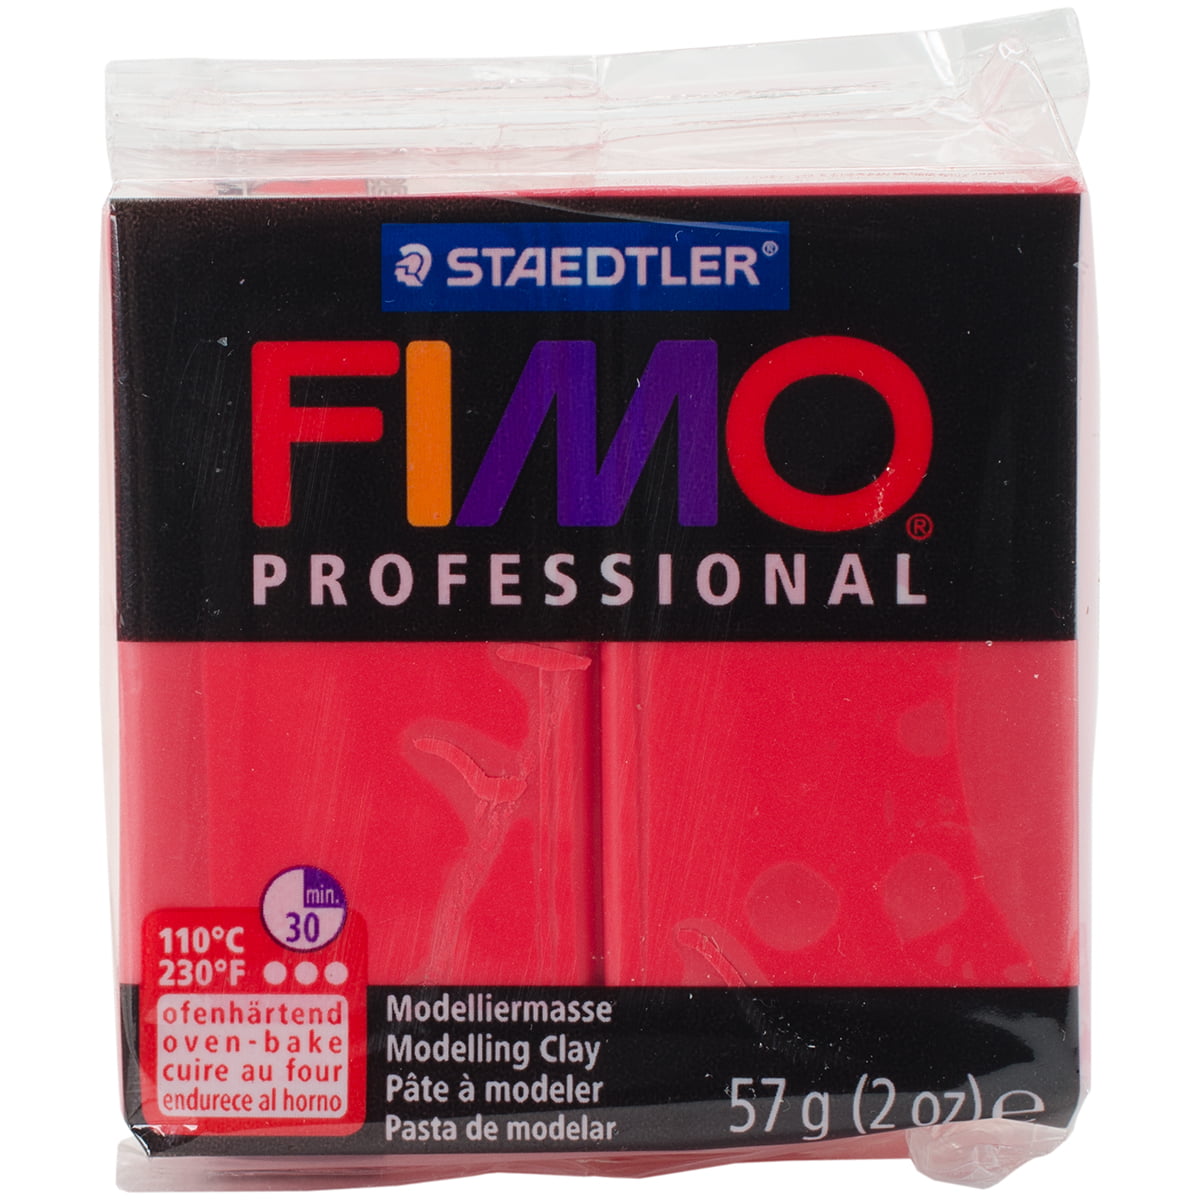 Lemon Yellow Staedtler Fimo Professional Soft Polymer Clay 2 oz